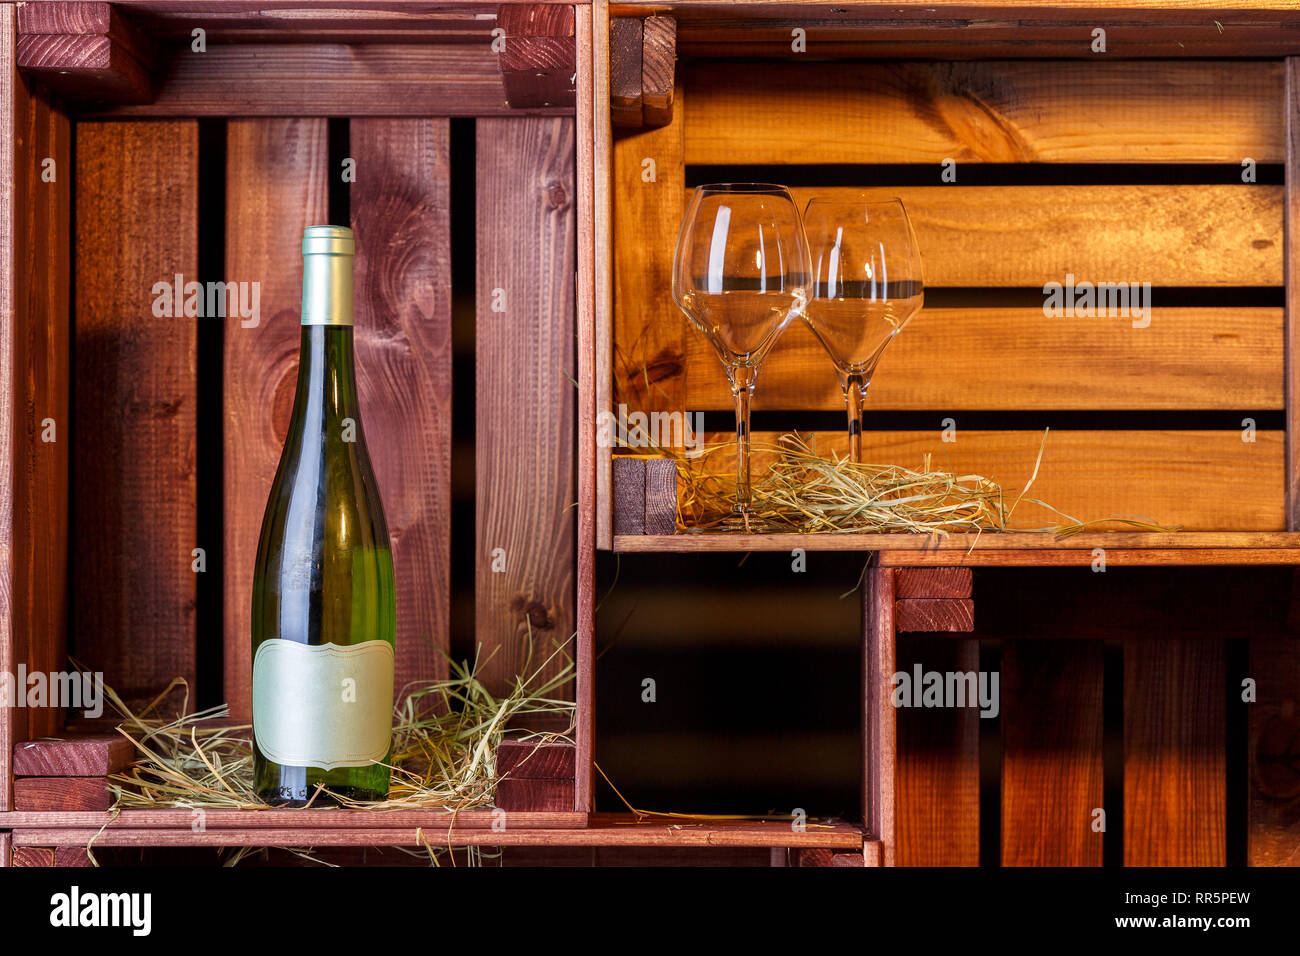 Download Photo Of Green Bottle Two Wine Glasses In Several Wooden Boxes Stock Photo Alamy Yellowimages Mockups